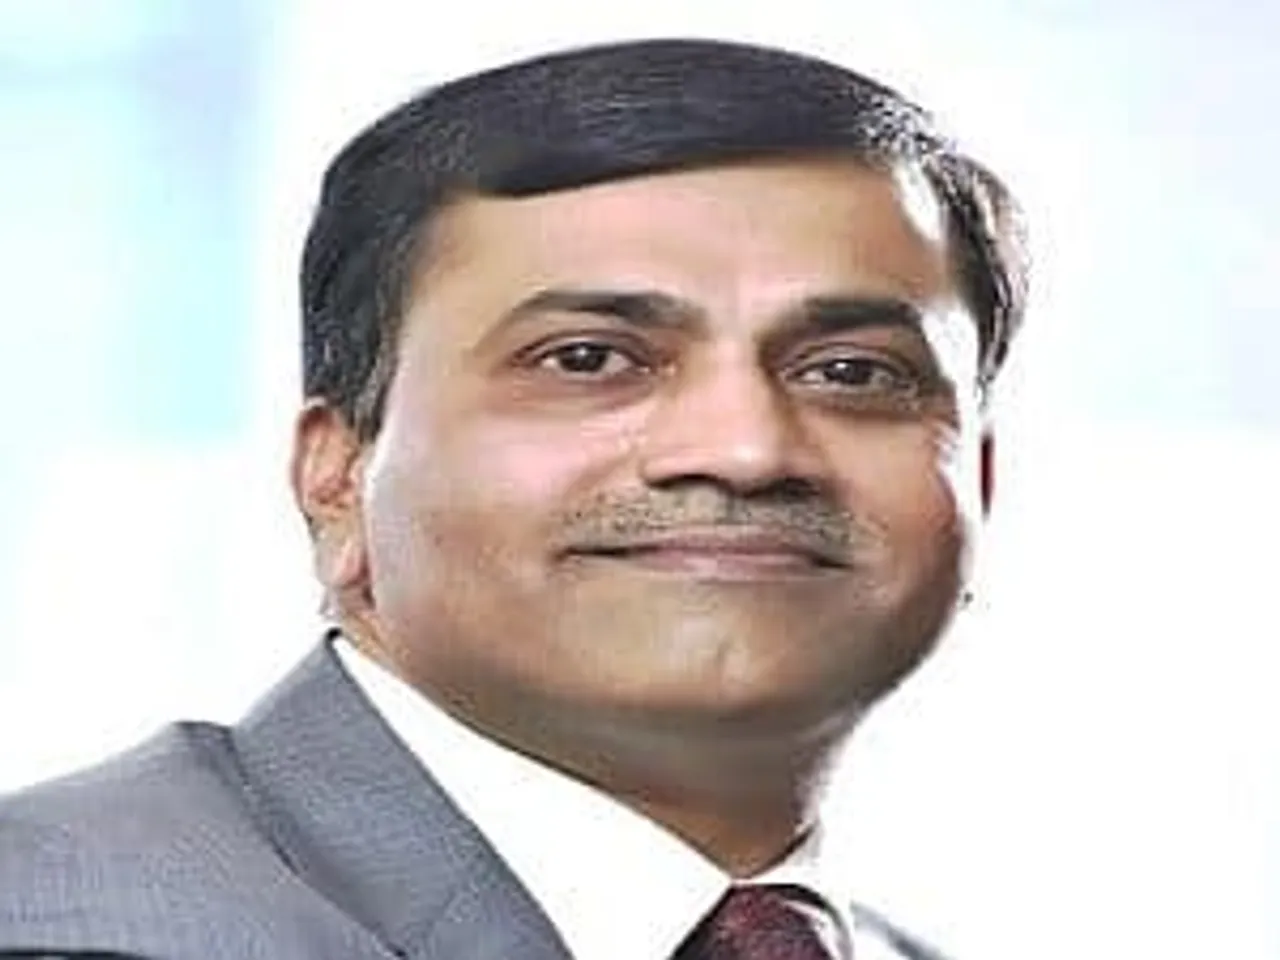 Vijay Mhaskar steps in the shoes of Chief Operating Officer for Security firm Quick Heal